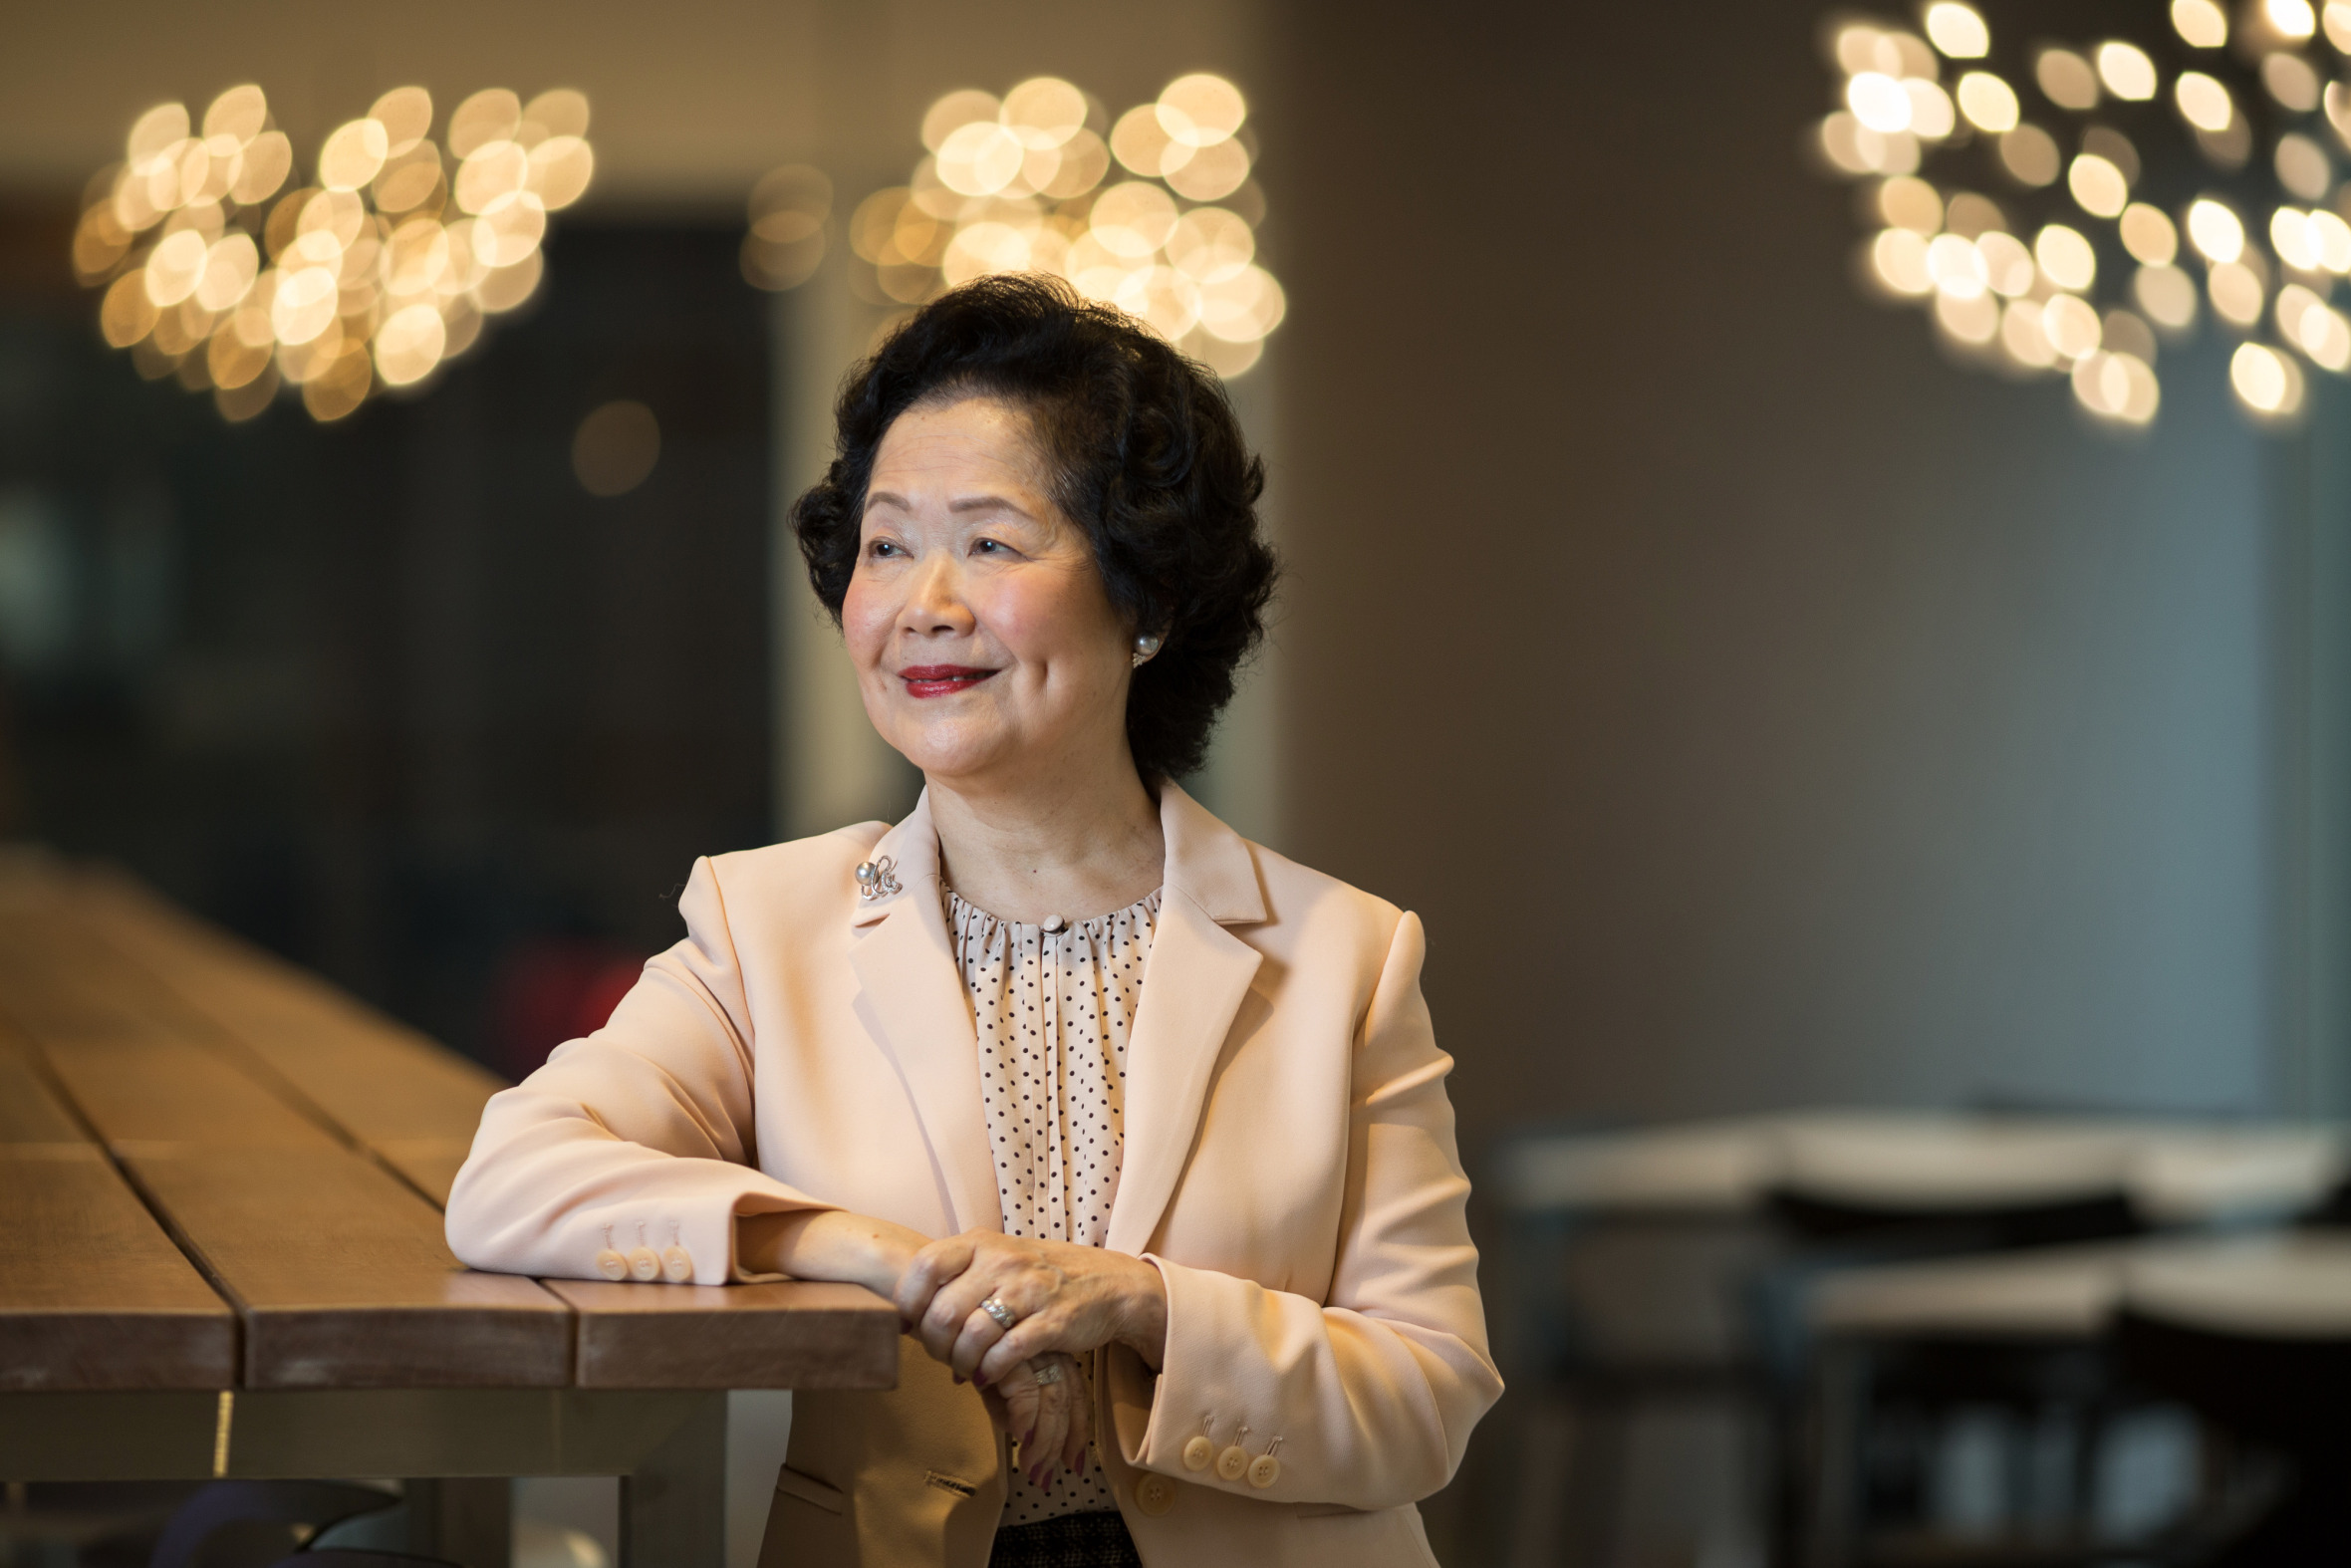 Anson Chan, Hong Kong's former chief secretary, poses for a photograph following a television interview in Hong Kong on June 19, 2015 (Bloomberg/Getty Images)